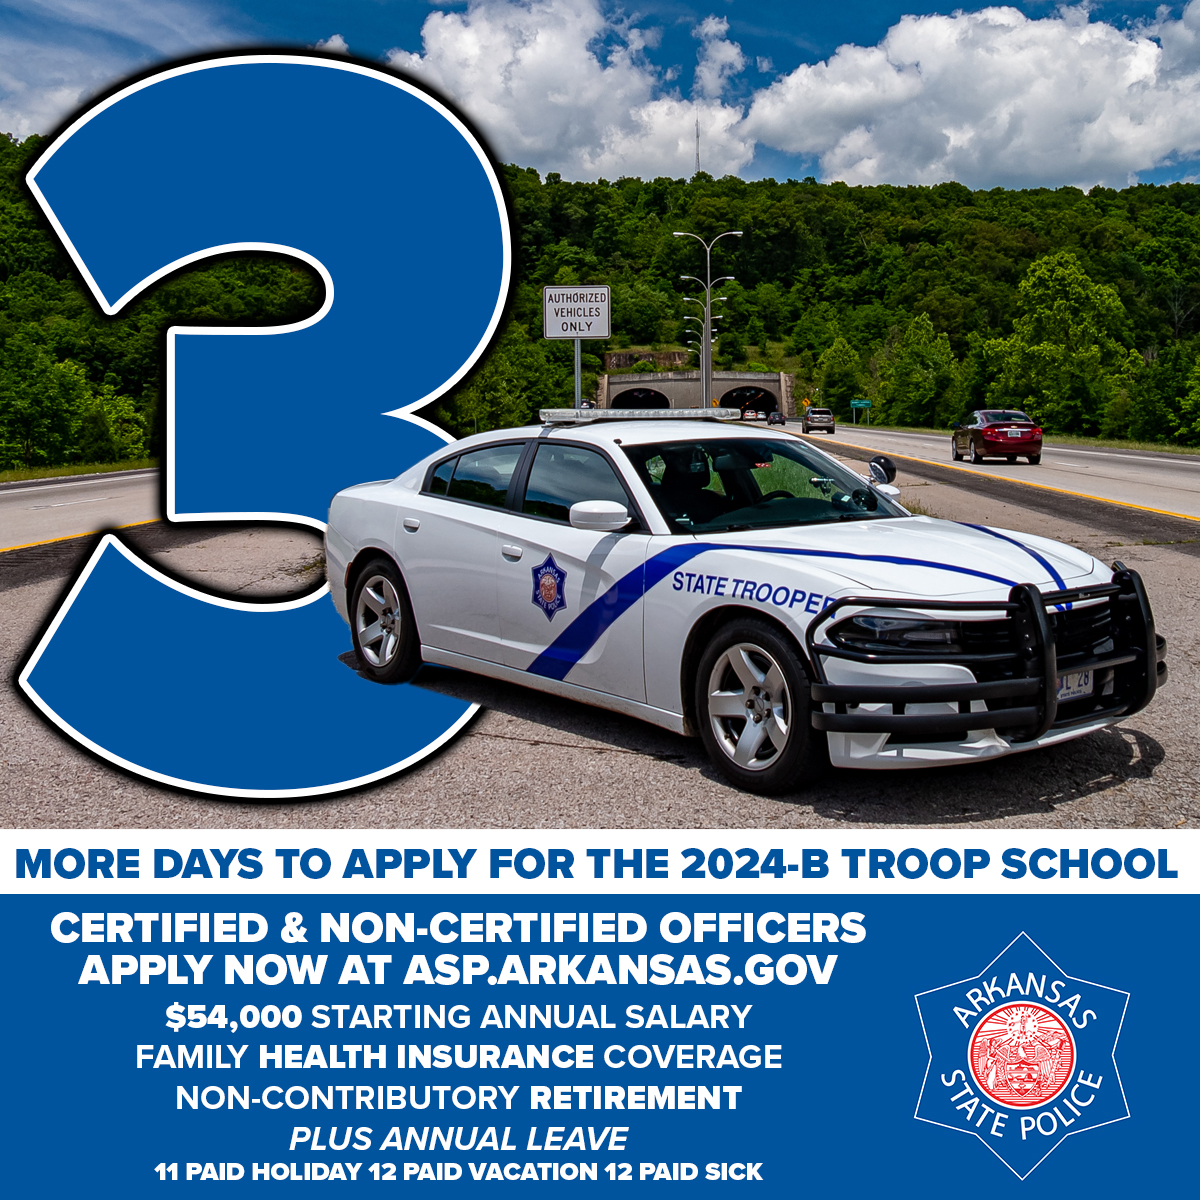 There's ONLY 3 MORE DAYS left to apply for Troop School 2024-B! The school, scheduled to begin in October, is open to CERTIFIED AND NON-CERTIFIED applicants. Visit: bit.ly/ASPTroopSchool… for details on the application process. APPLICATION DEADLINE: 04/30/2024 – 11:59 p.m.